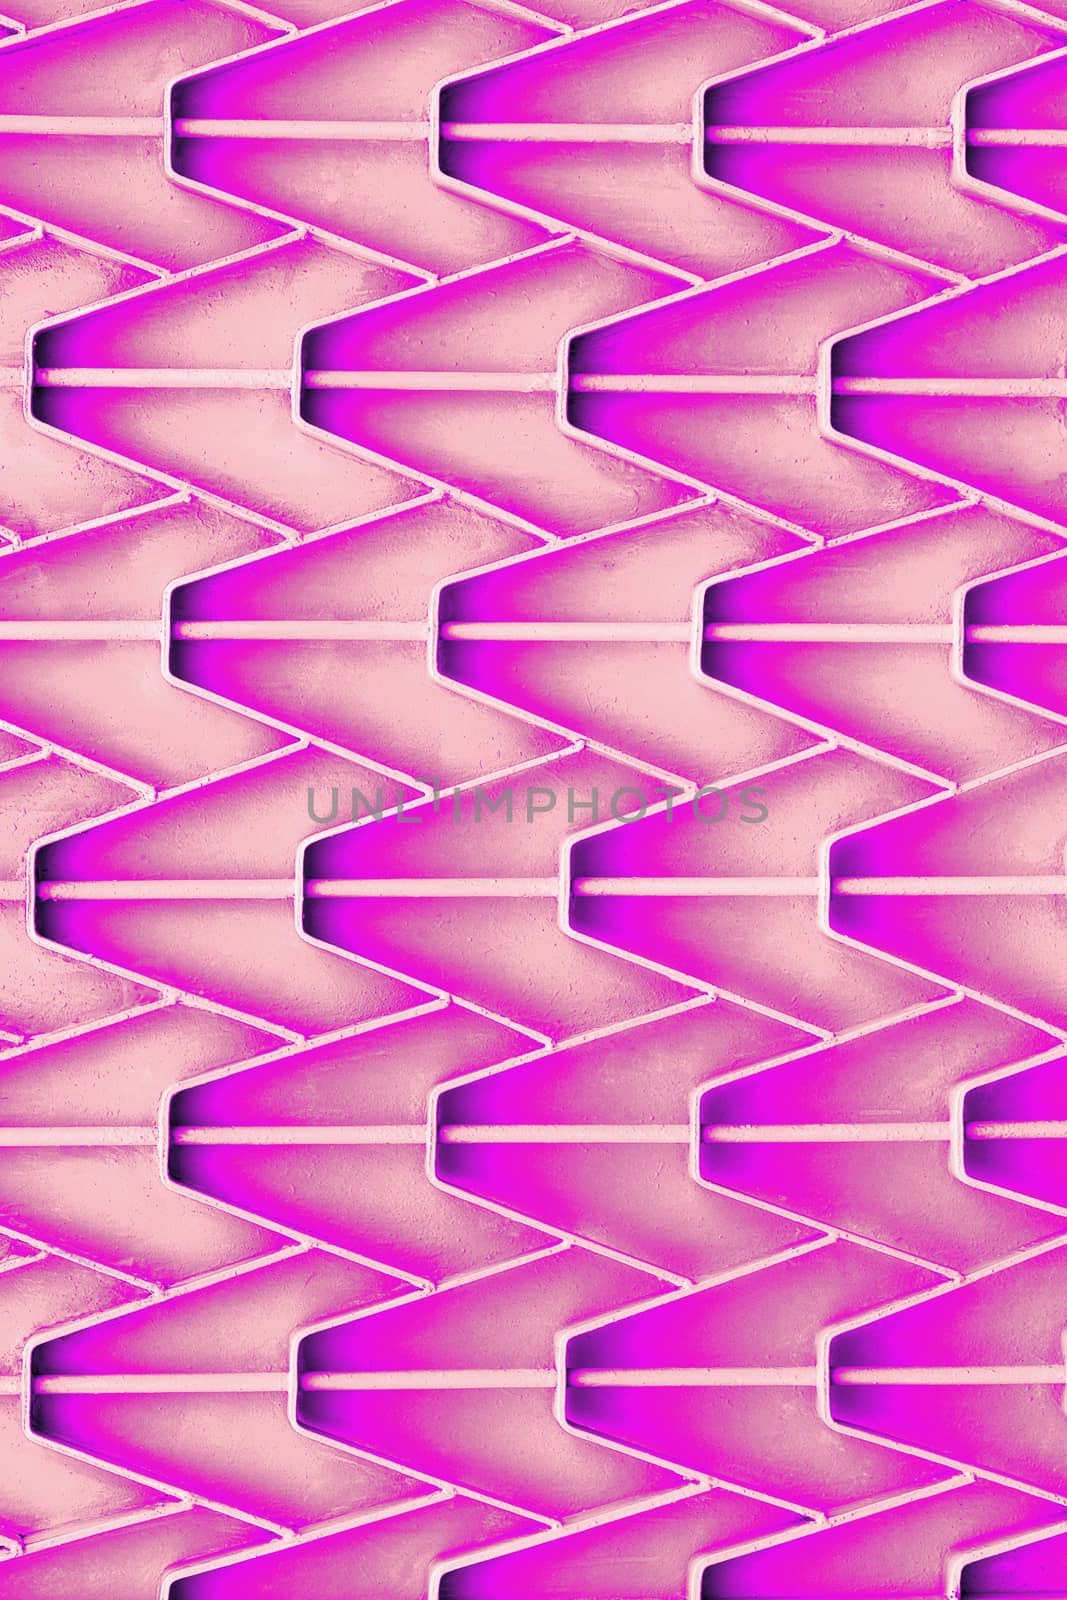 Patterned metal fence with outdated bright pink paint. Abstract texture background. Vertical format. by Sergii